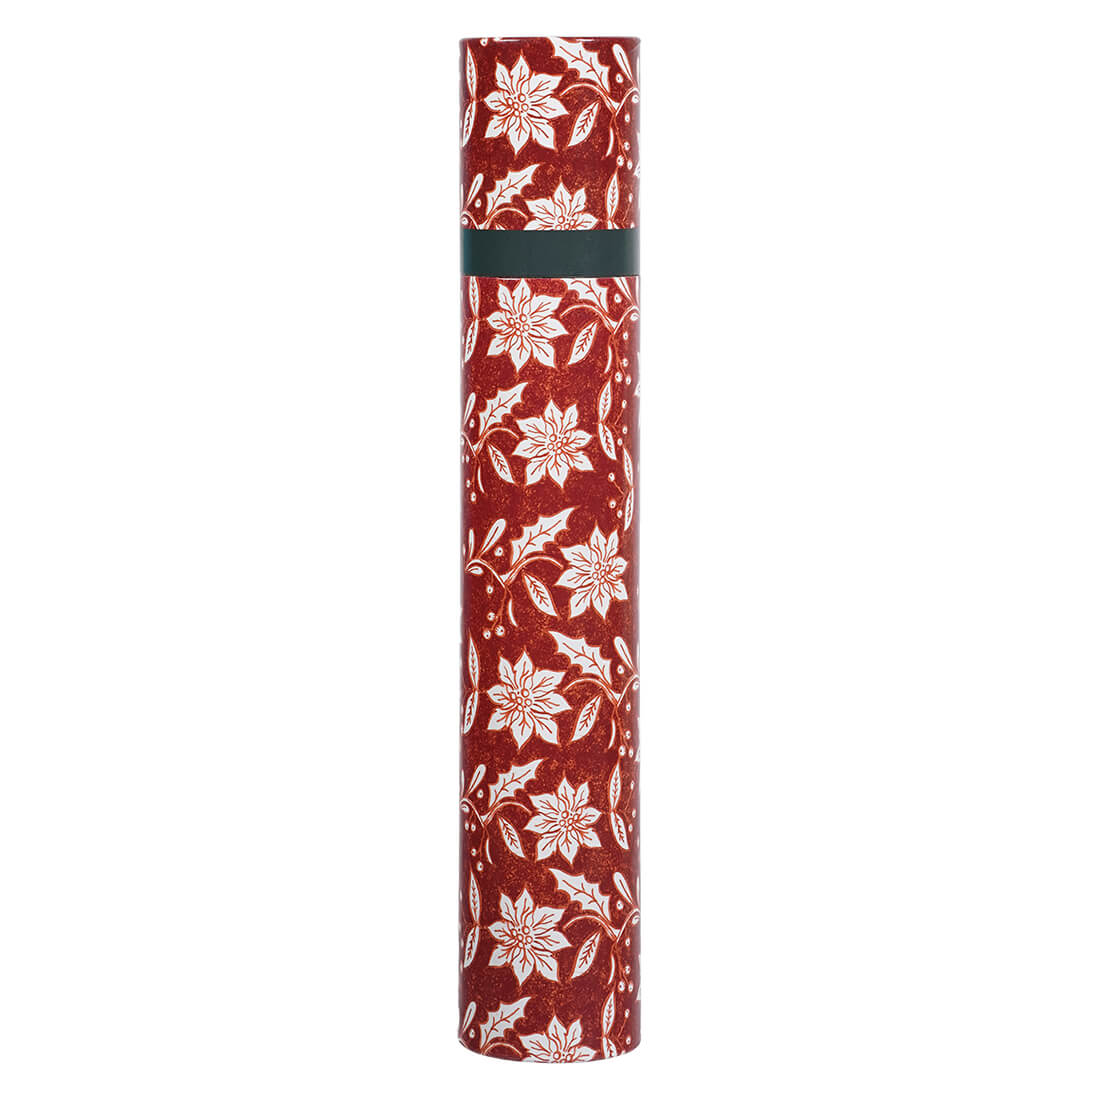 Poinsettia Fireplace Safety Matches in Tube Matchbox